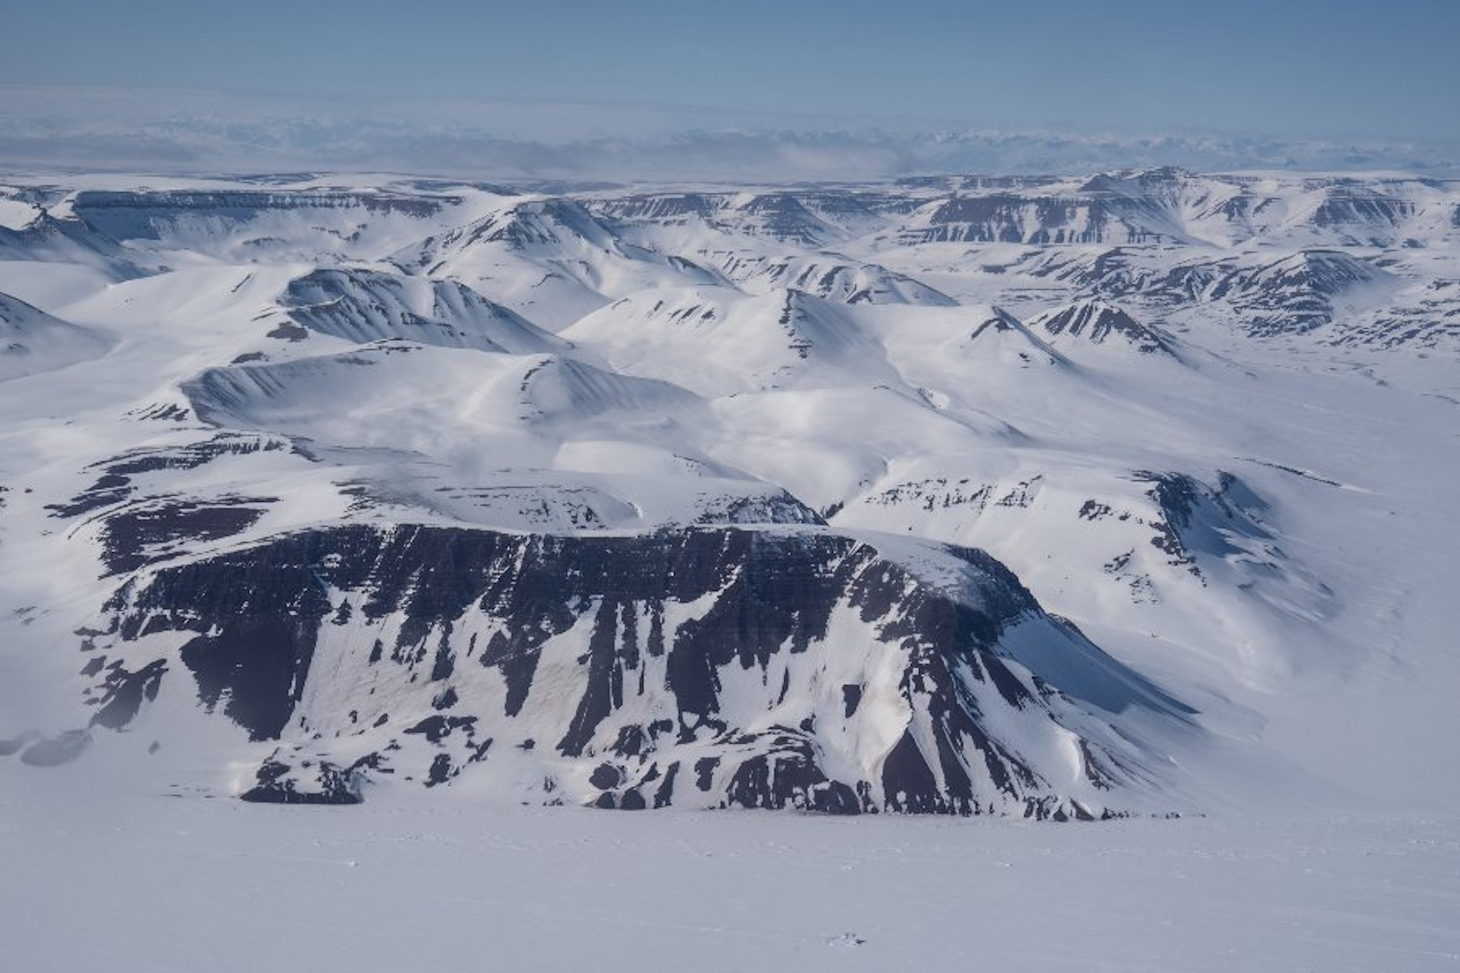 Greenland's polar ice cap - between Constable Point and Zackenberg, in the north east - at the end of winter. © Erwan Amice / Lemar / CNRS Media library 